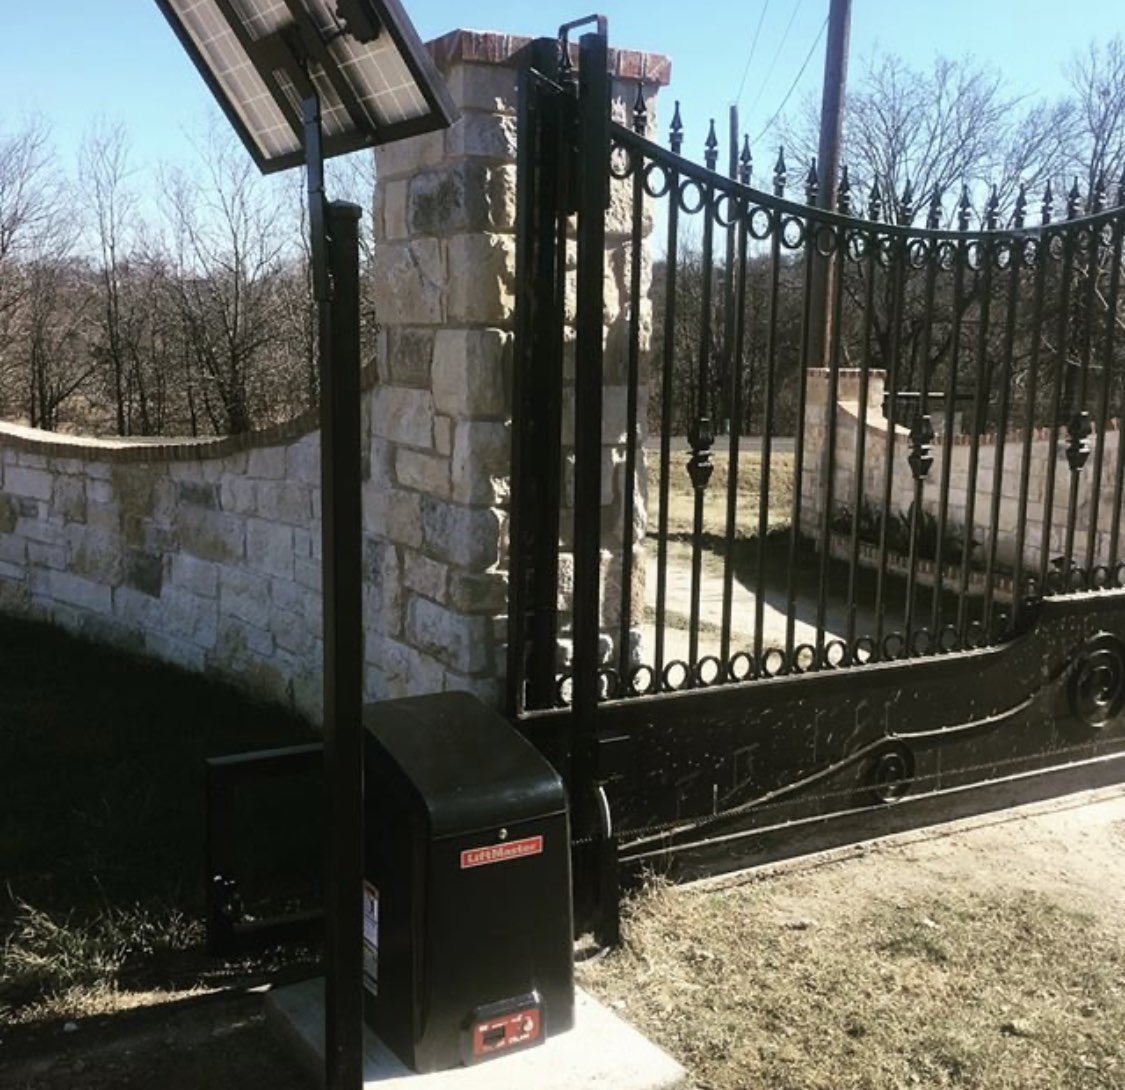 Upgrade your security with confidence! We pride ourselves in using only the most trusted LiftMaster gate automation engine to ensure premium quality and longevity for all of our services. #TrustedSecurity #LiftMaster #QualityGuaranteed 🚪🔒👍